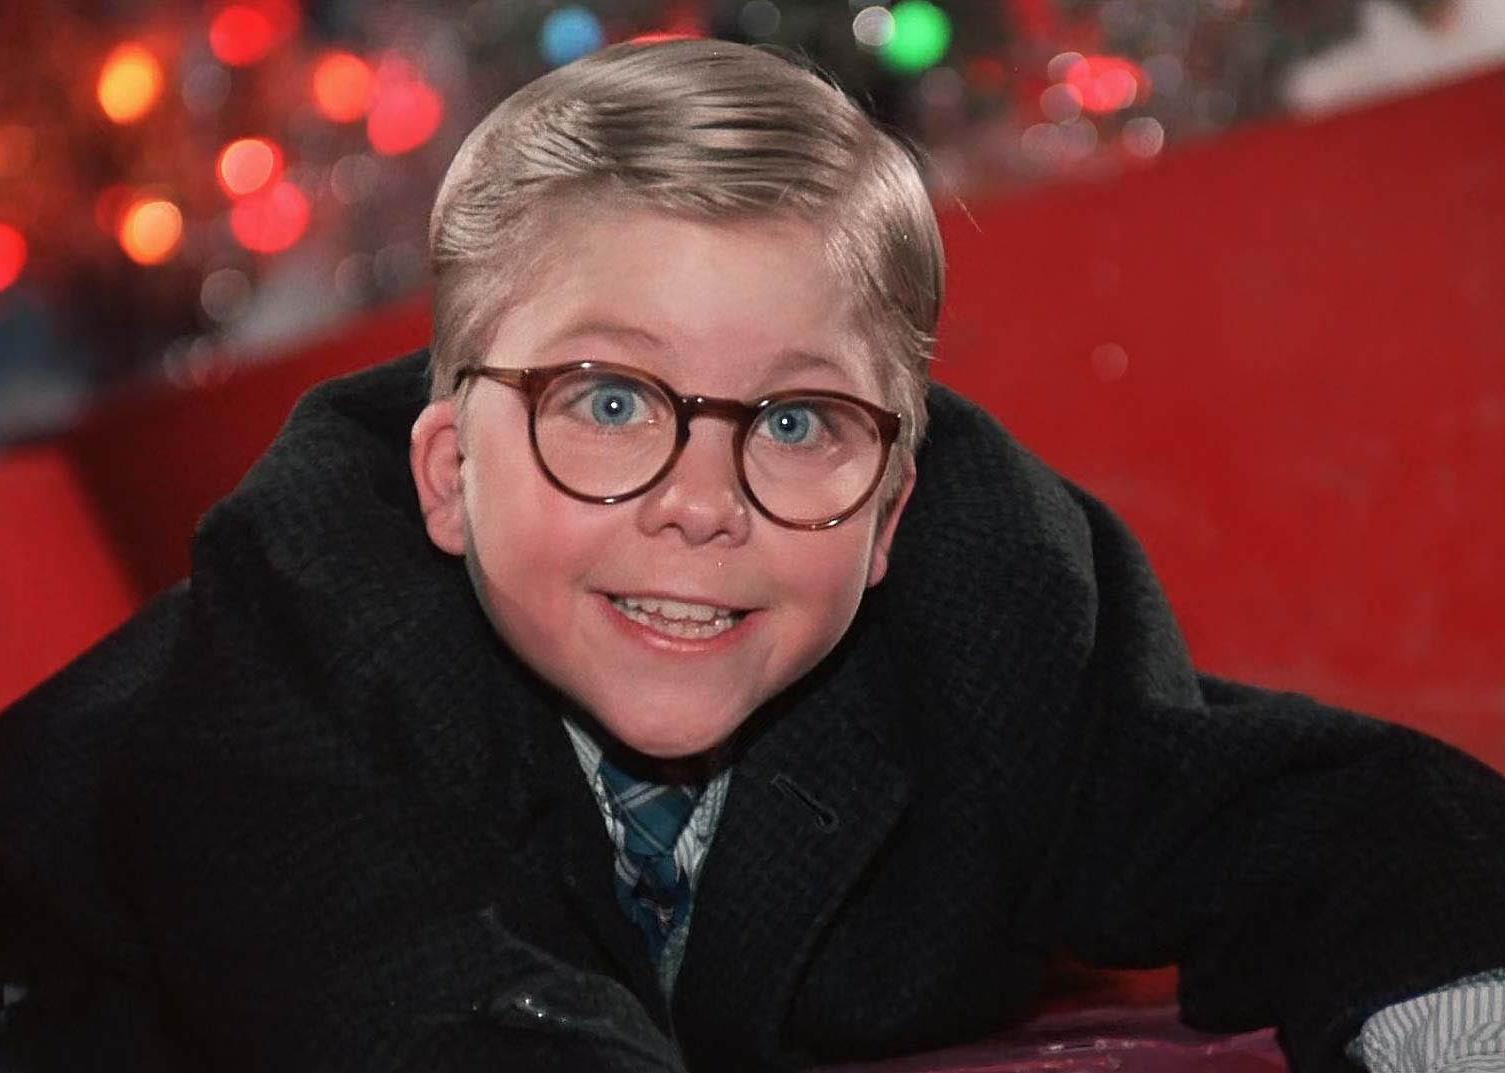 Peter Billingsley as a child smiling and wearing glasses in front of Christmas lights.